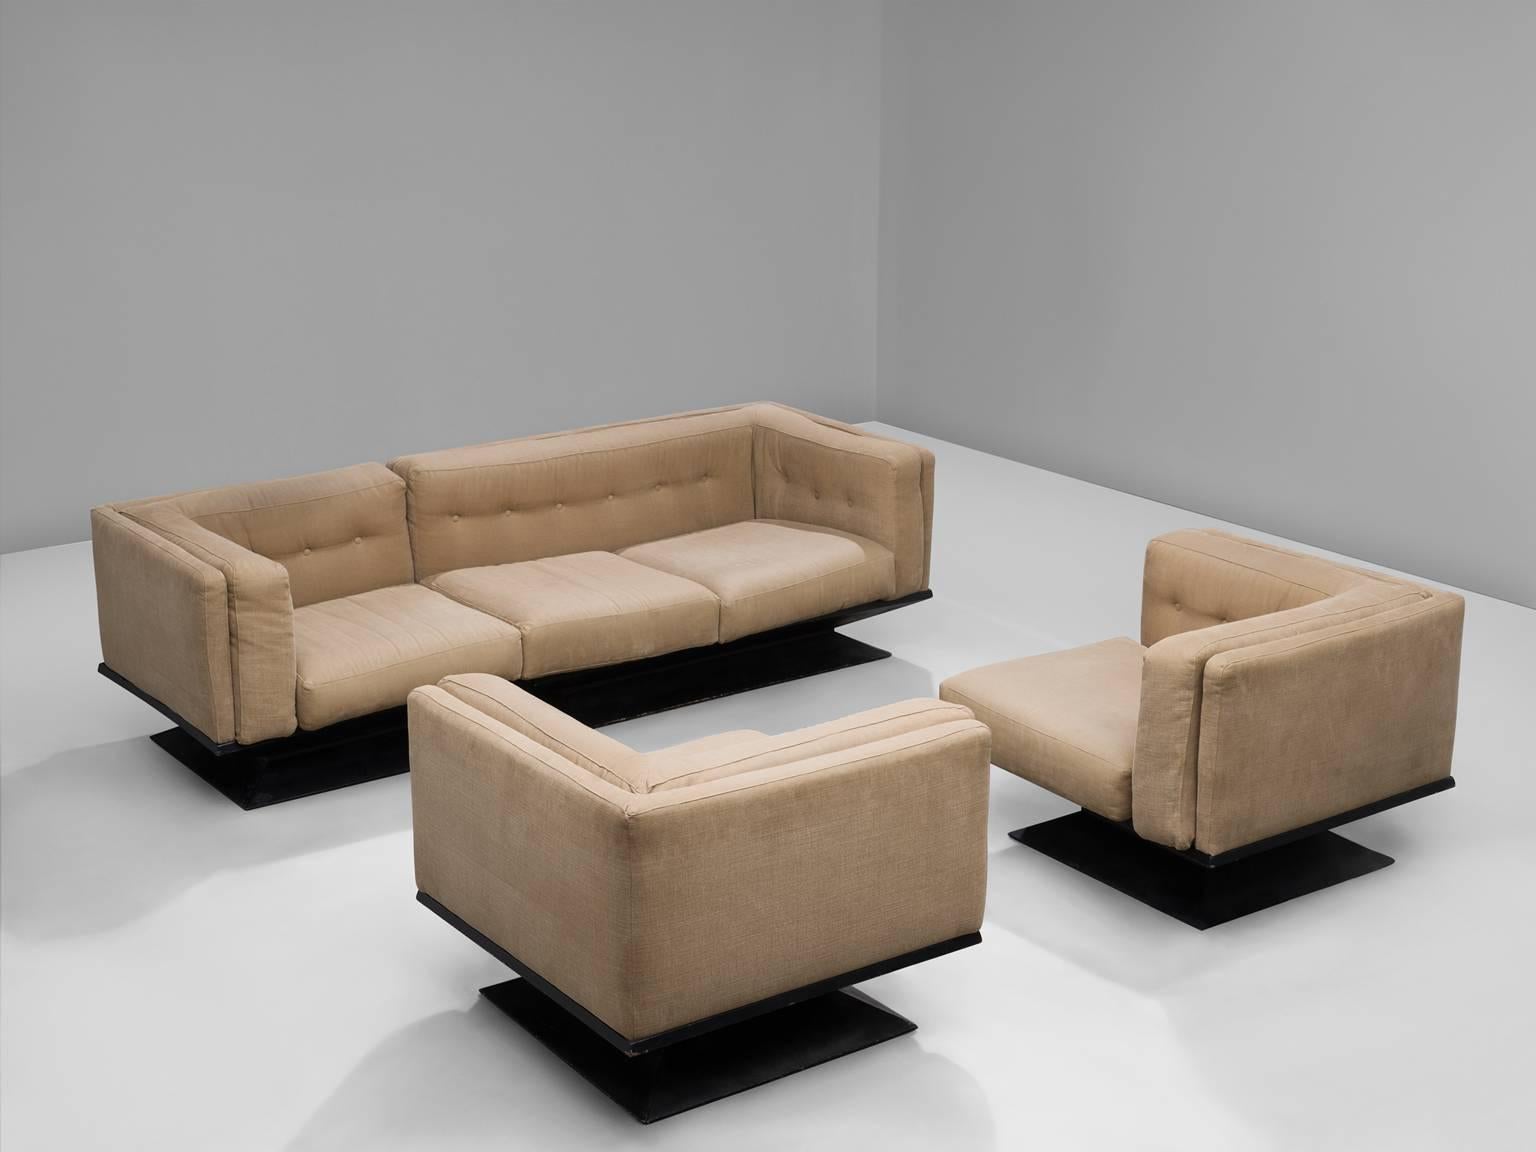 Lounge set with two club chairs and sofa by Luigi Pellegrin form MIM Roma, polyester, fabric, Italy, 1957.

This lounge set is upholstered with a beige fabric and features a polyester trapeze or hourglass base. Because of the design of the